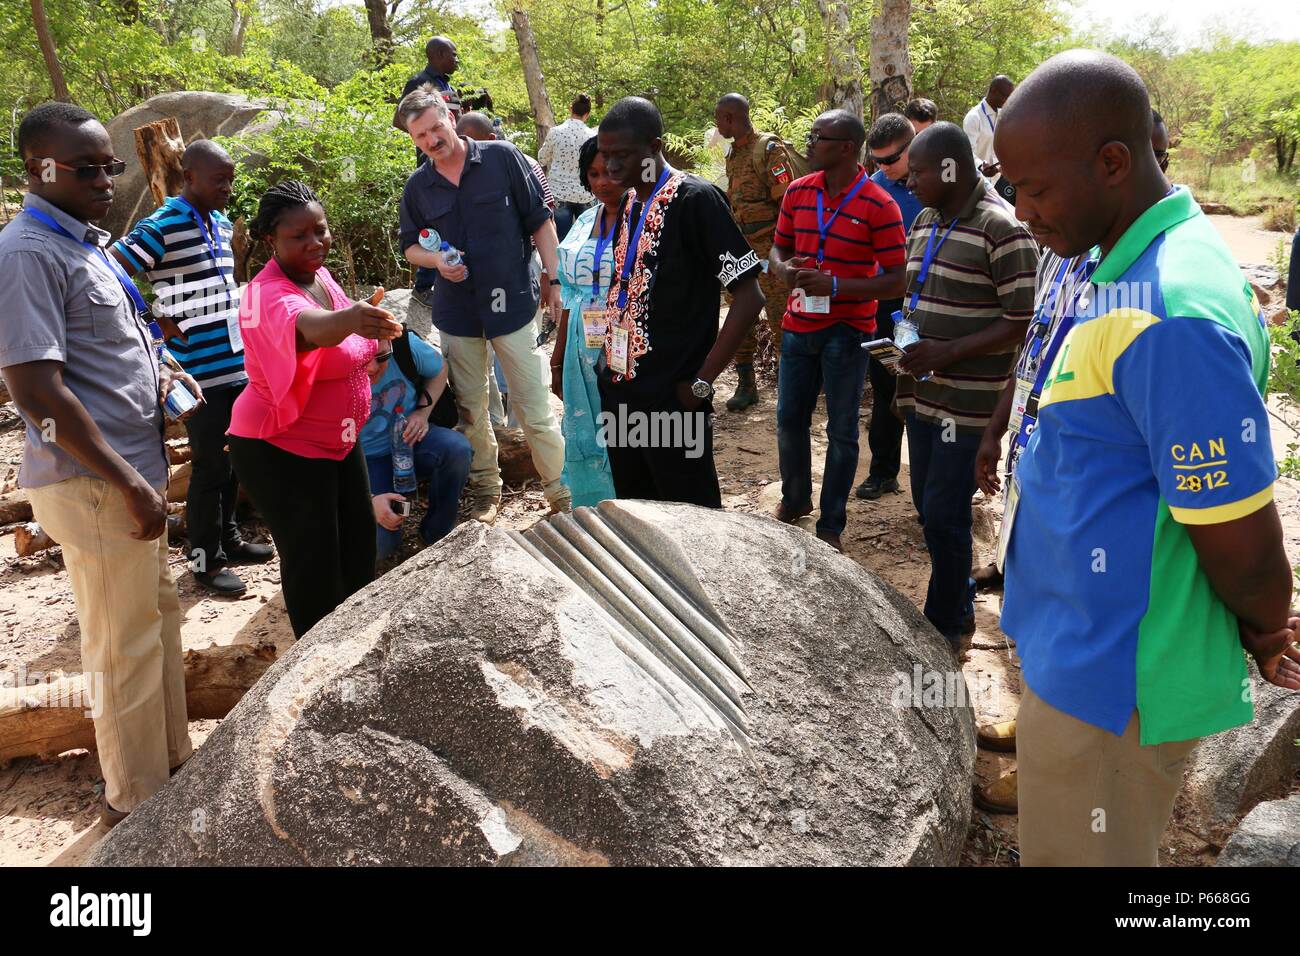 Western Accord 16 participants gaze at a rock sculpture at The Granite  Sculptures of Laongo in Burkina Faso, May 8, 2016. This was the first  activity during the group's Cultural Day event. (